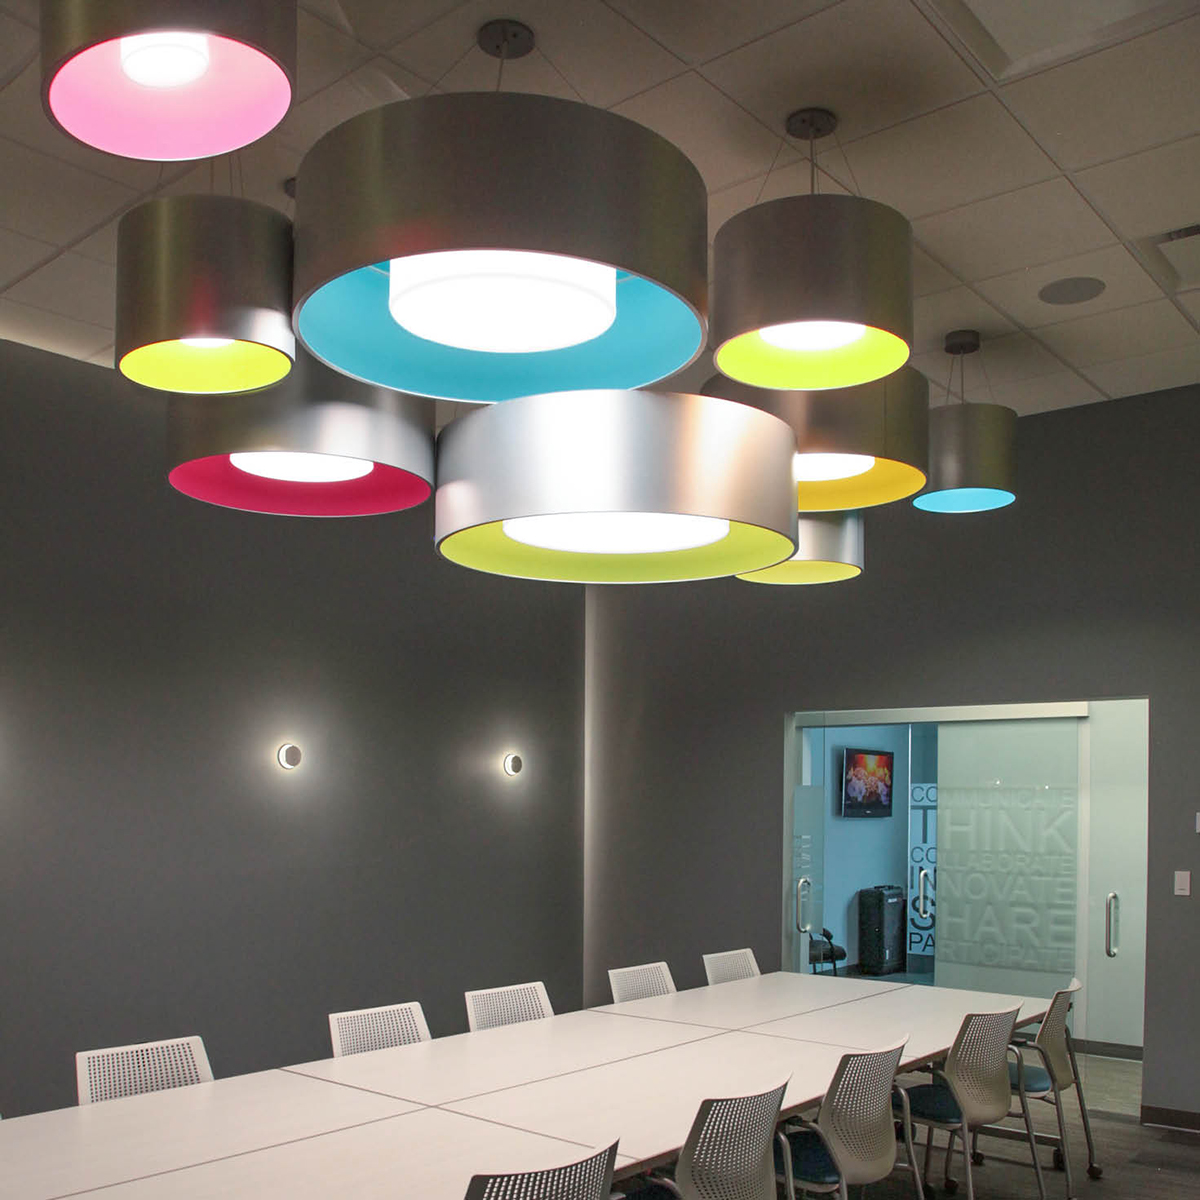 Acoustic Pendant Lighting Over Conference Table